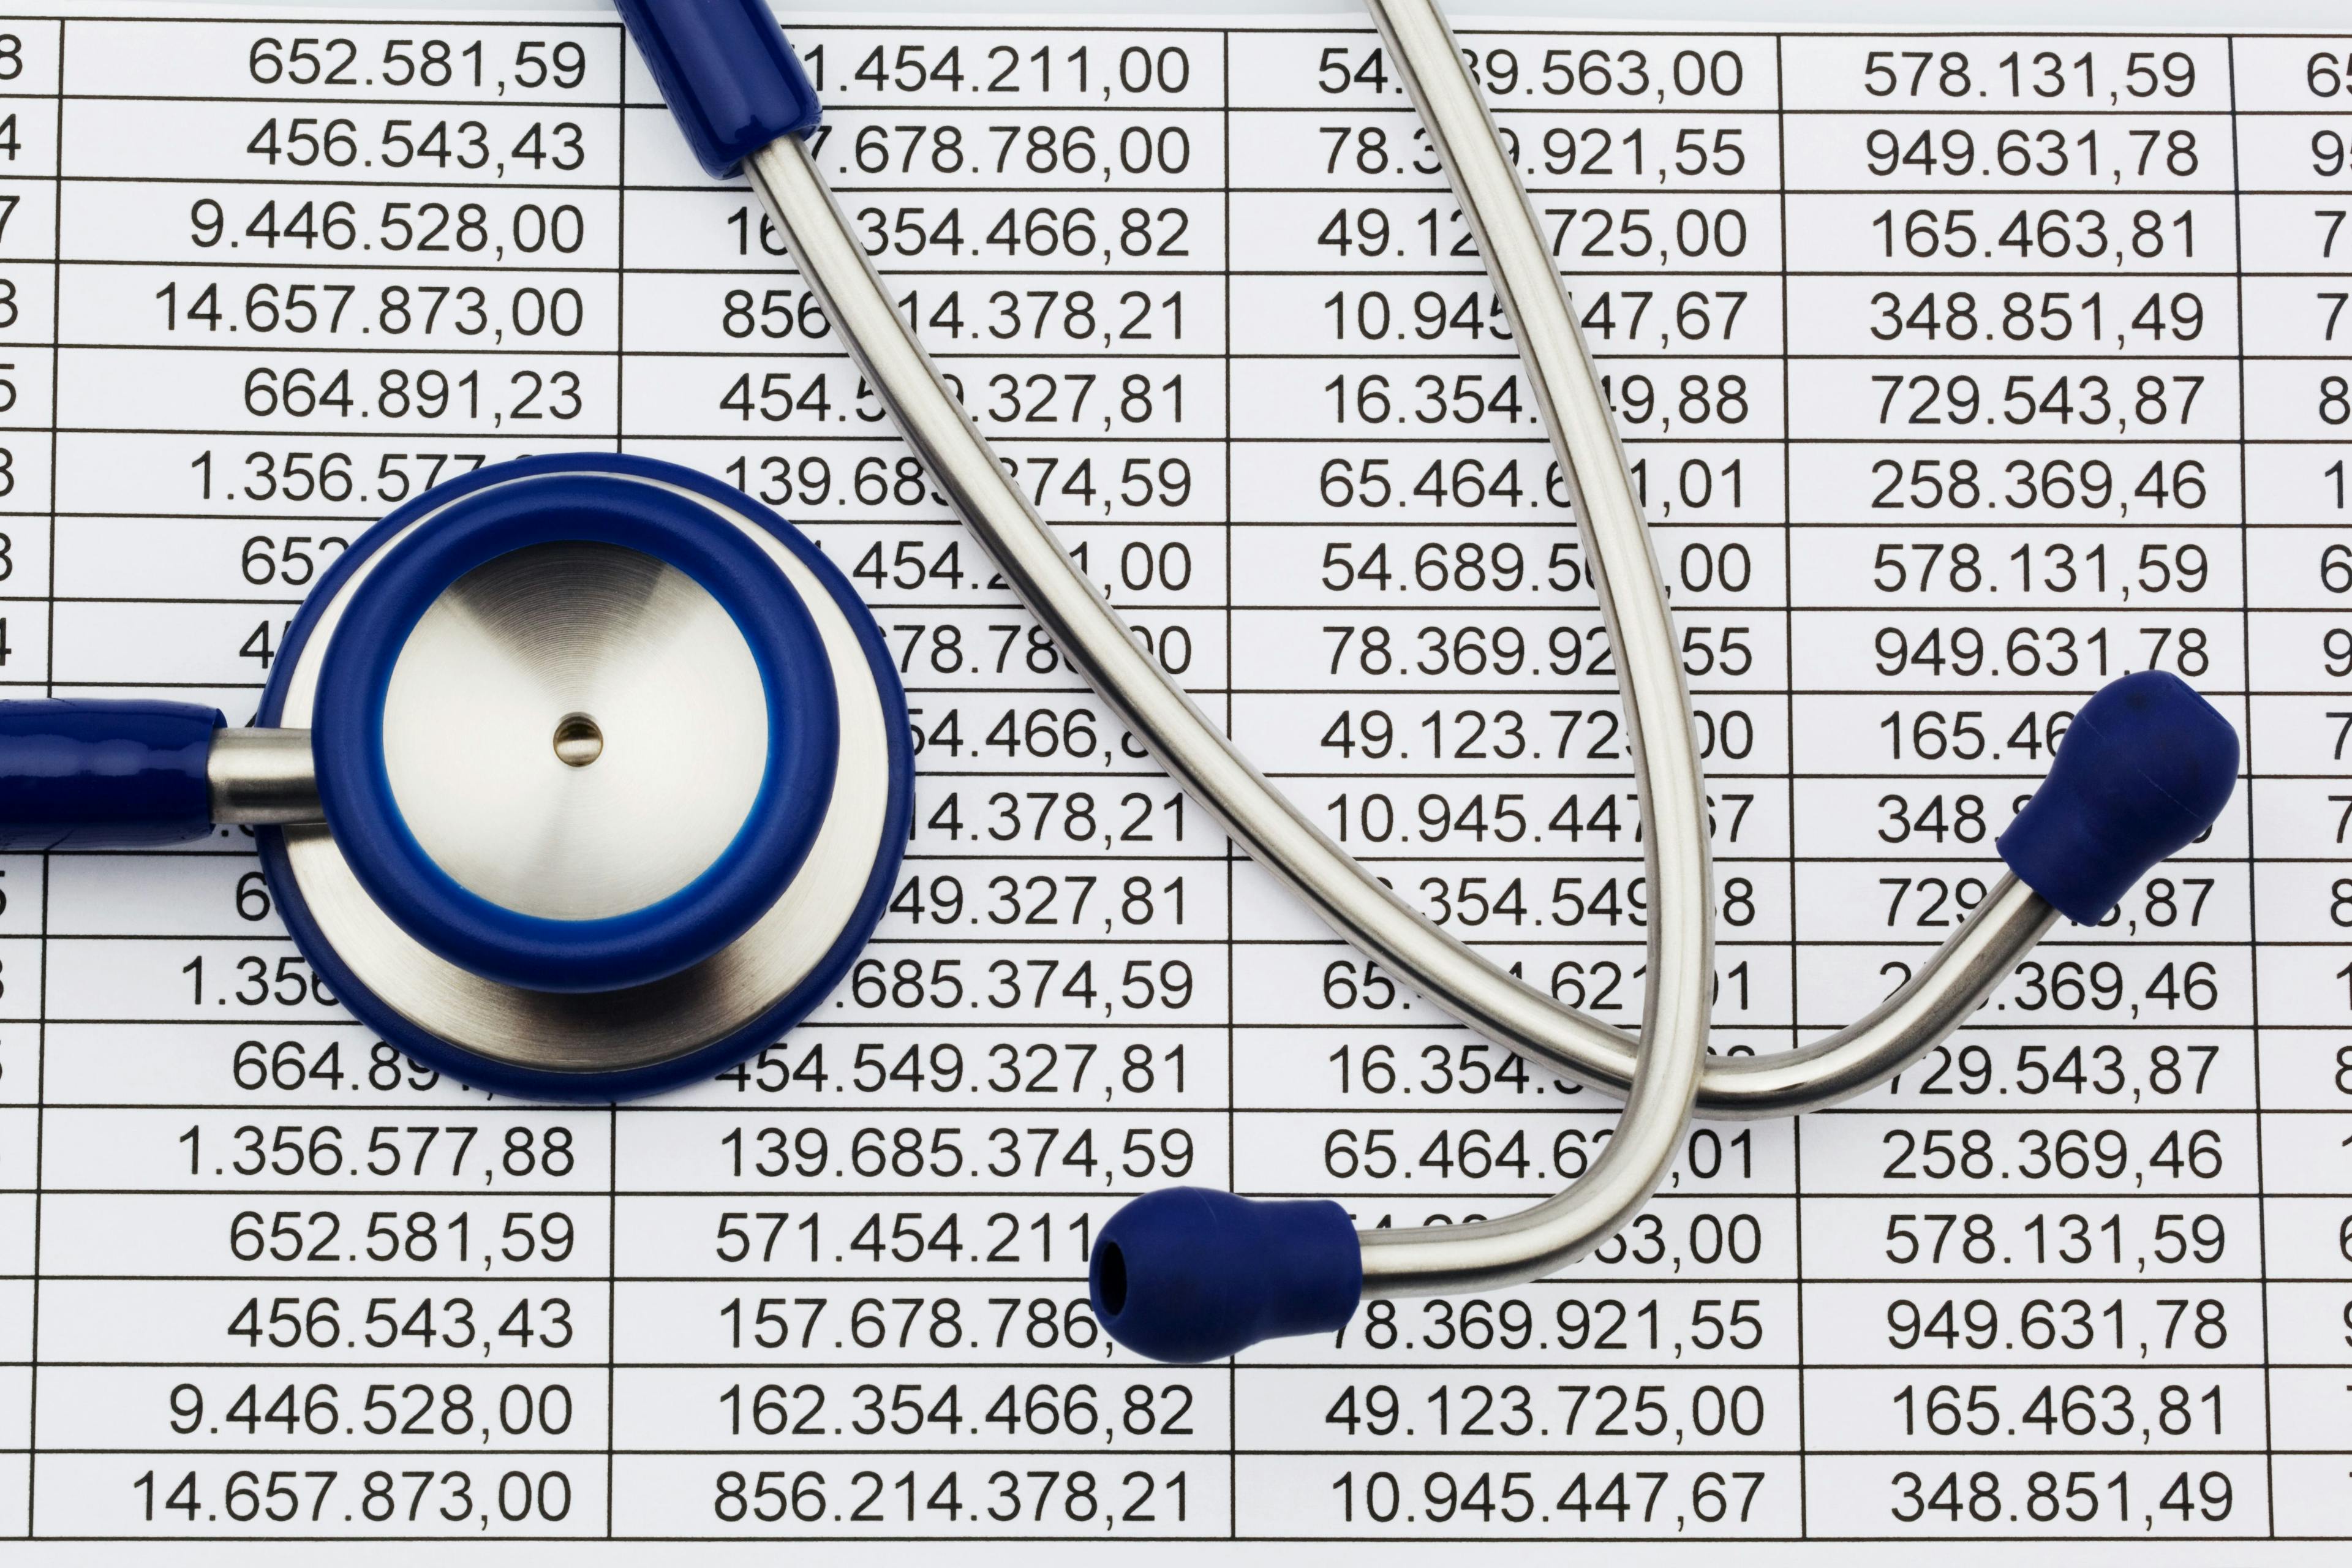 3.75% pay cut in proposed 2022 Medicare Physician Fee Schedule